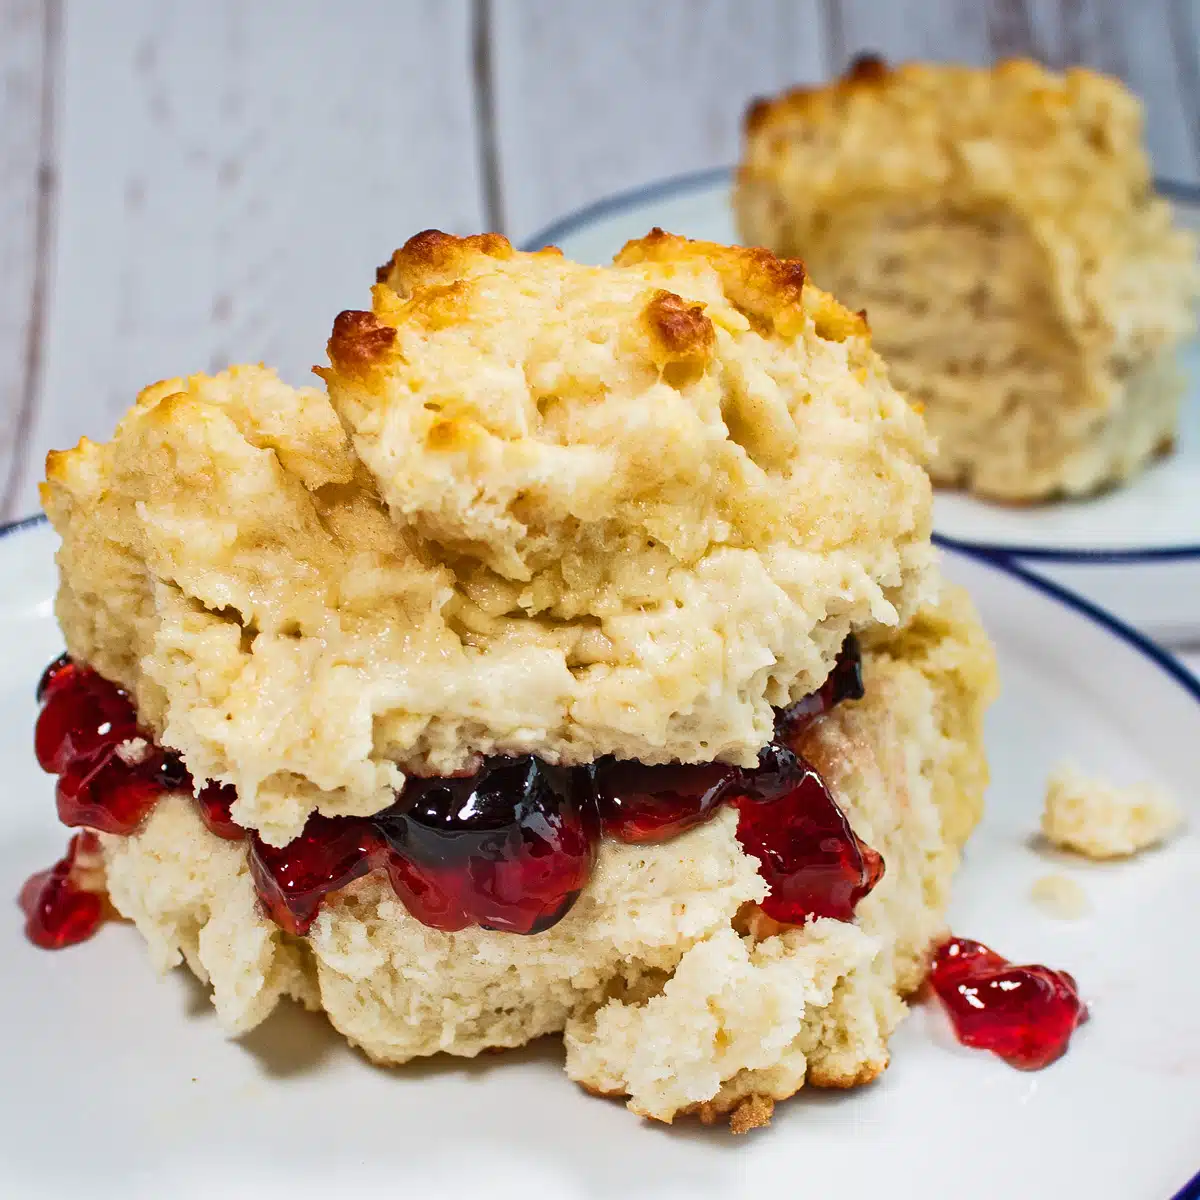 Tasty cathead biscuits recipe for giant southern buttermilk biscuits that are perfect with heaping spoonfuls of jam or jelly.